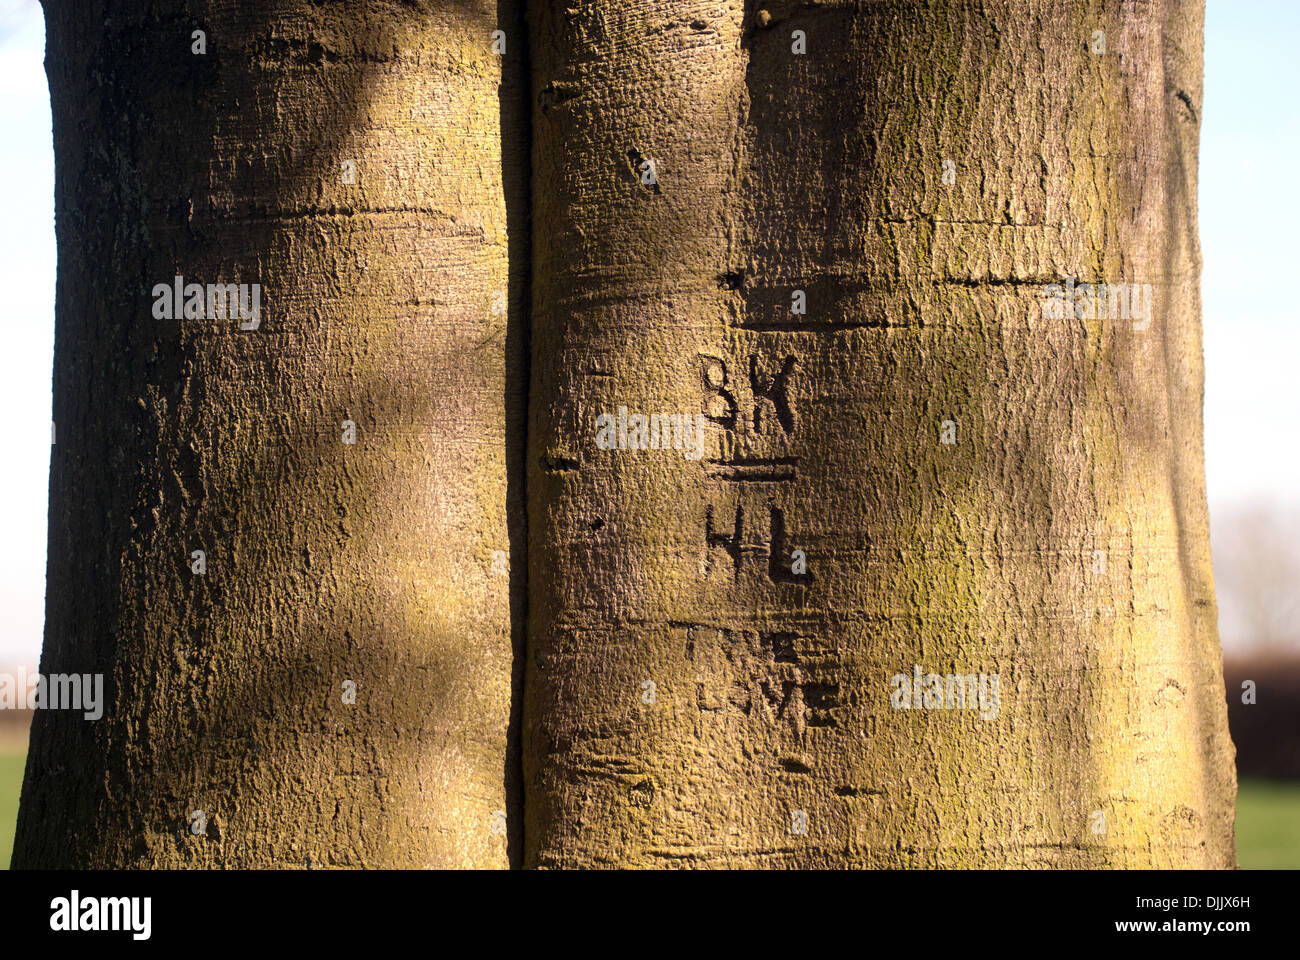 Initials carved in tree trunk / Declaration of love Stock Photo